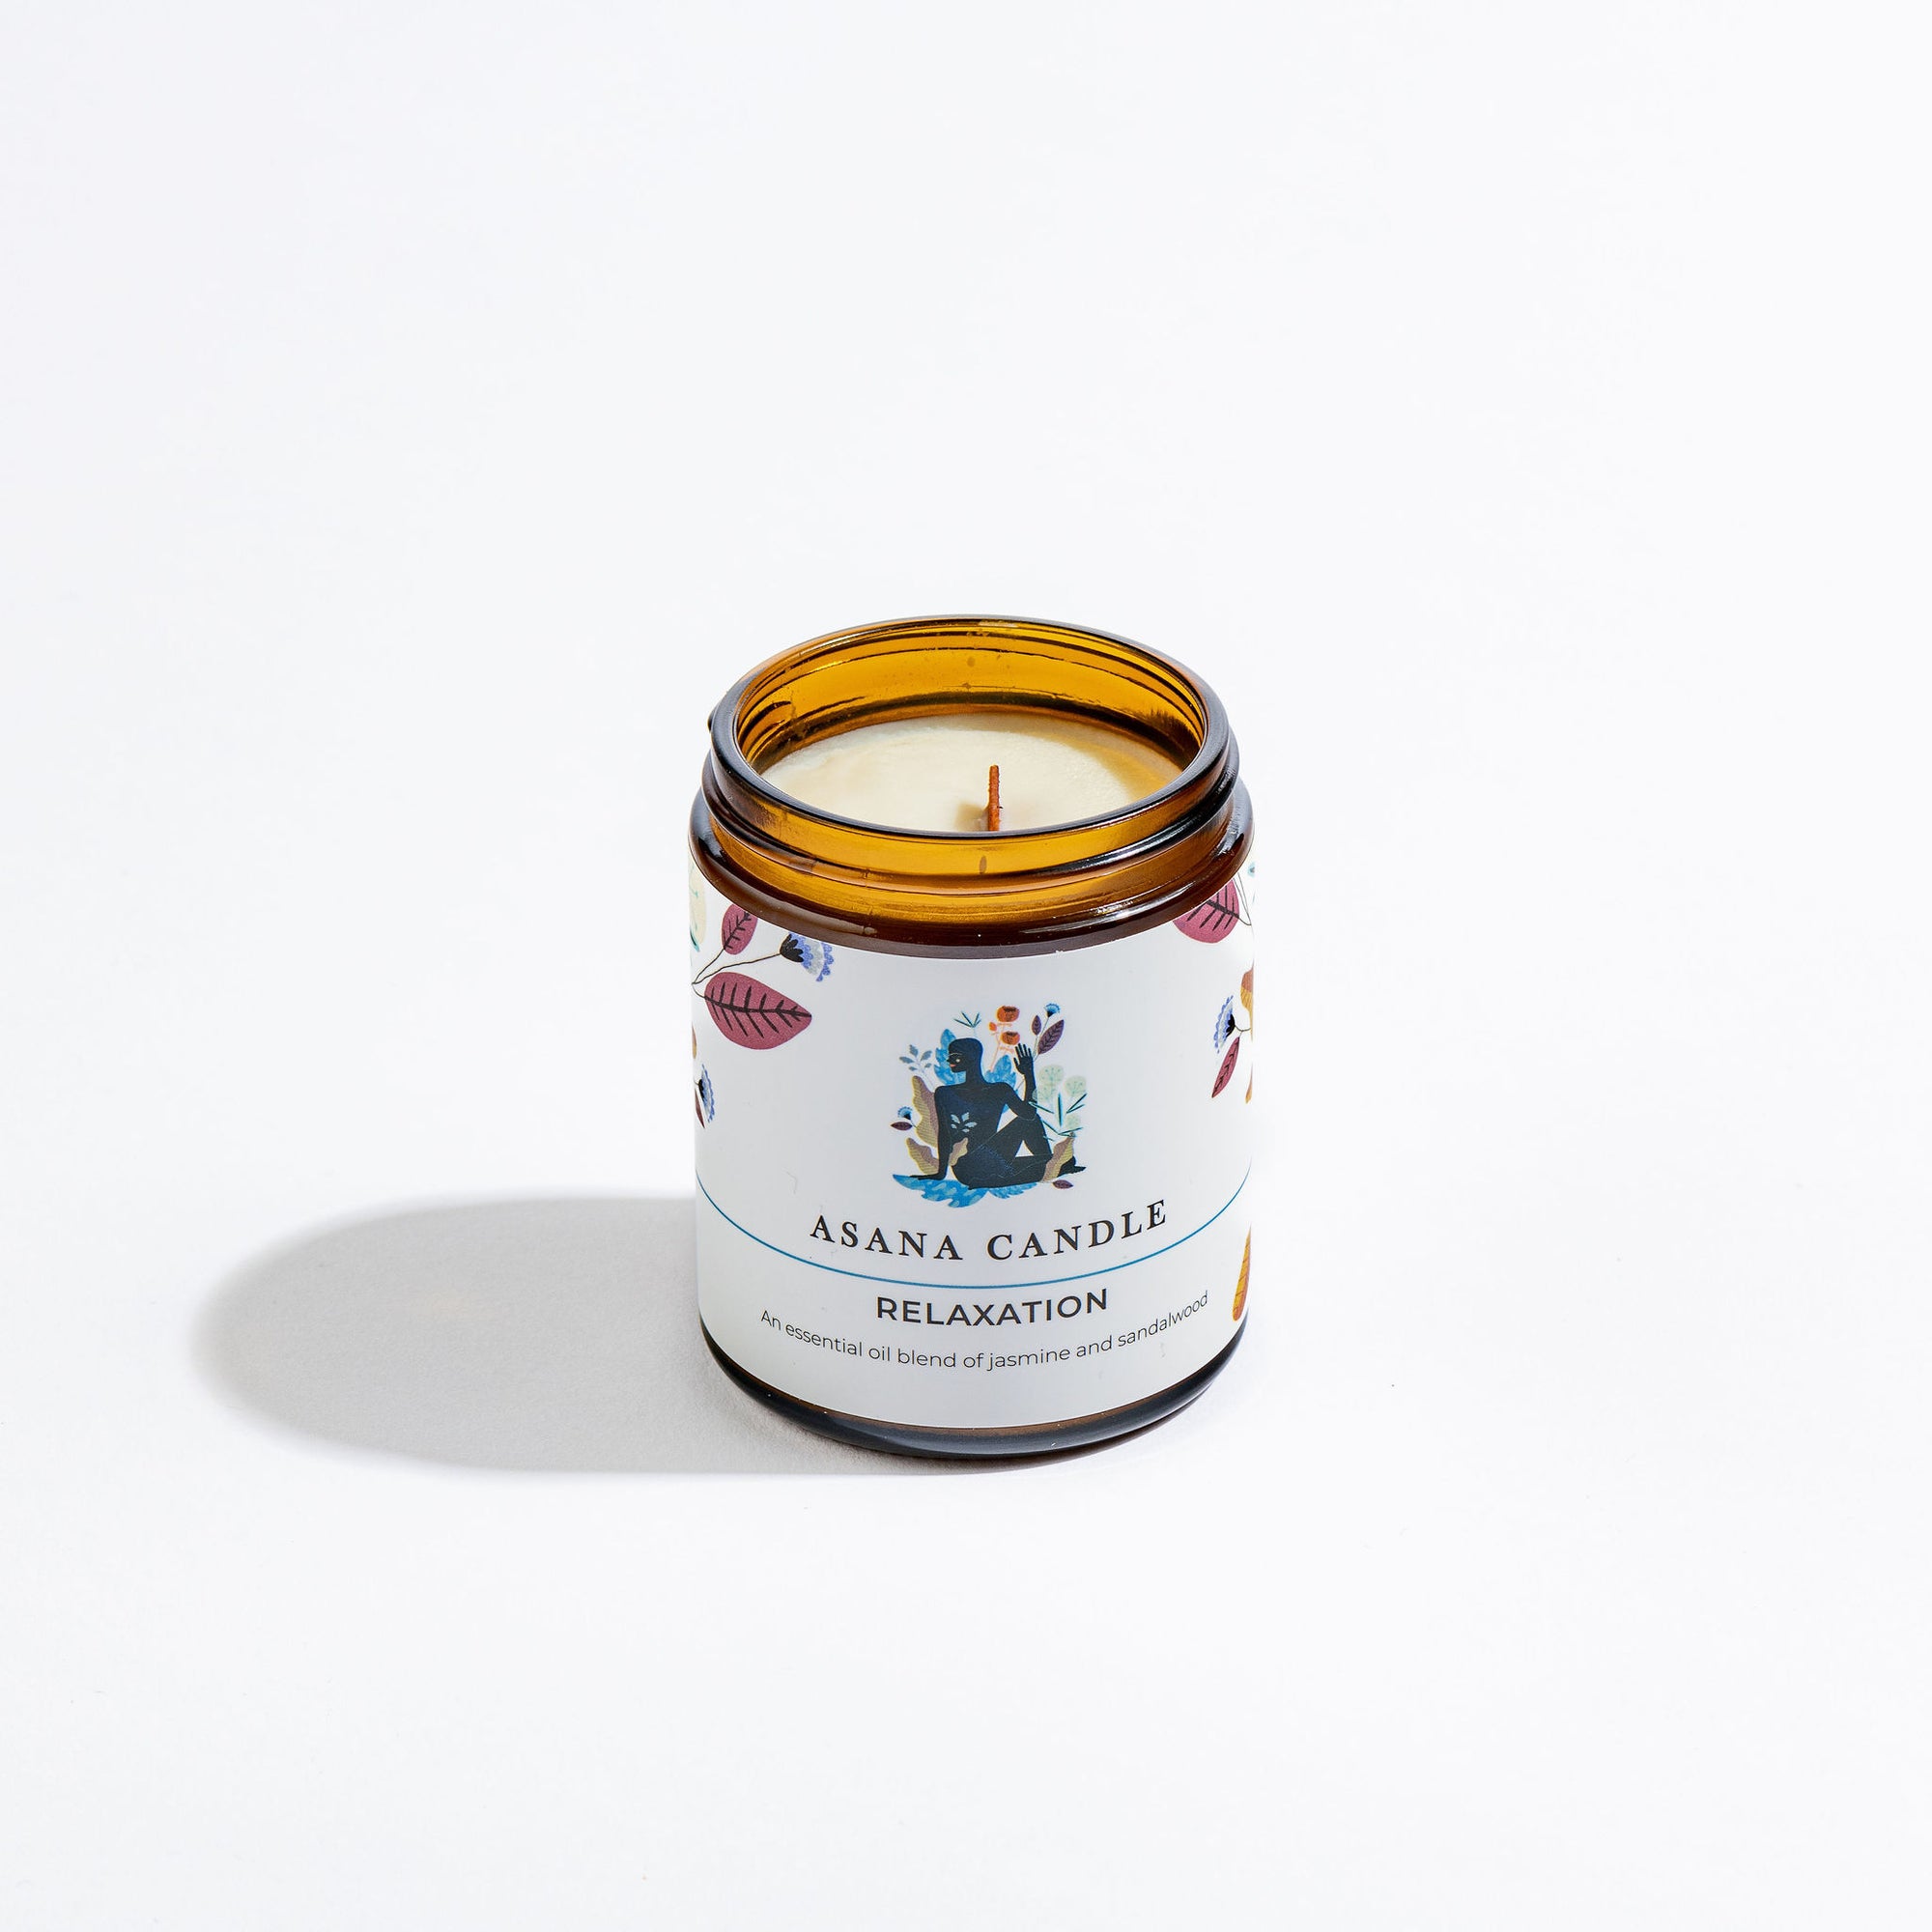 Relaxation - Asana Candle | Luxury Candles & Home Fragrances by Light + Glo